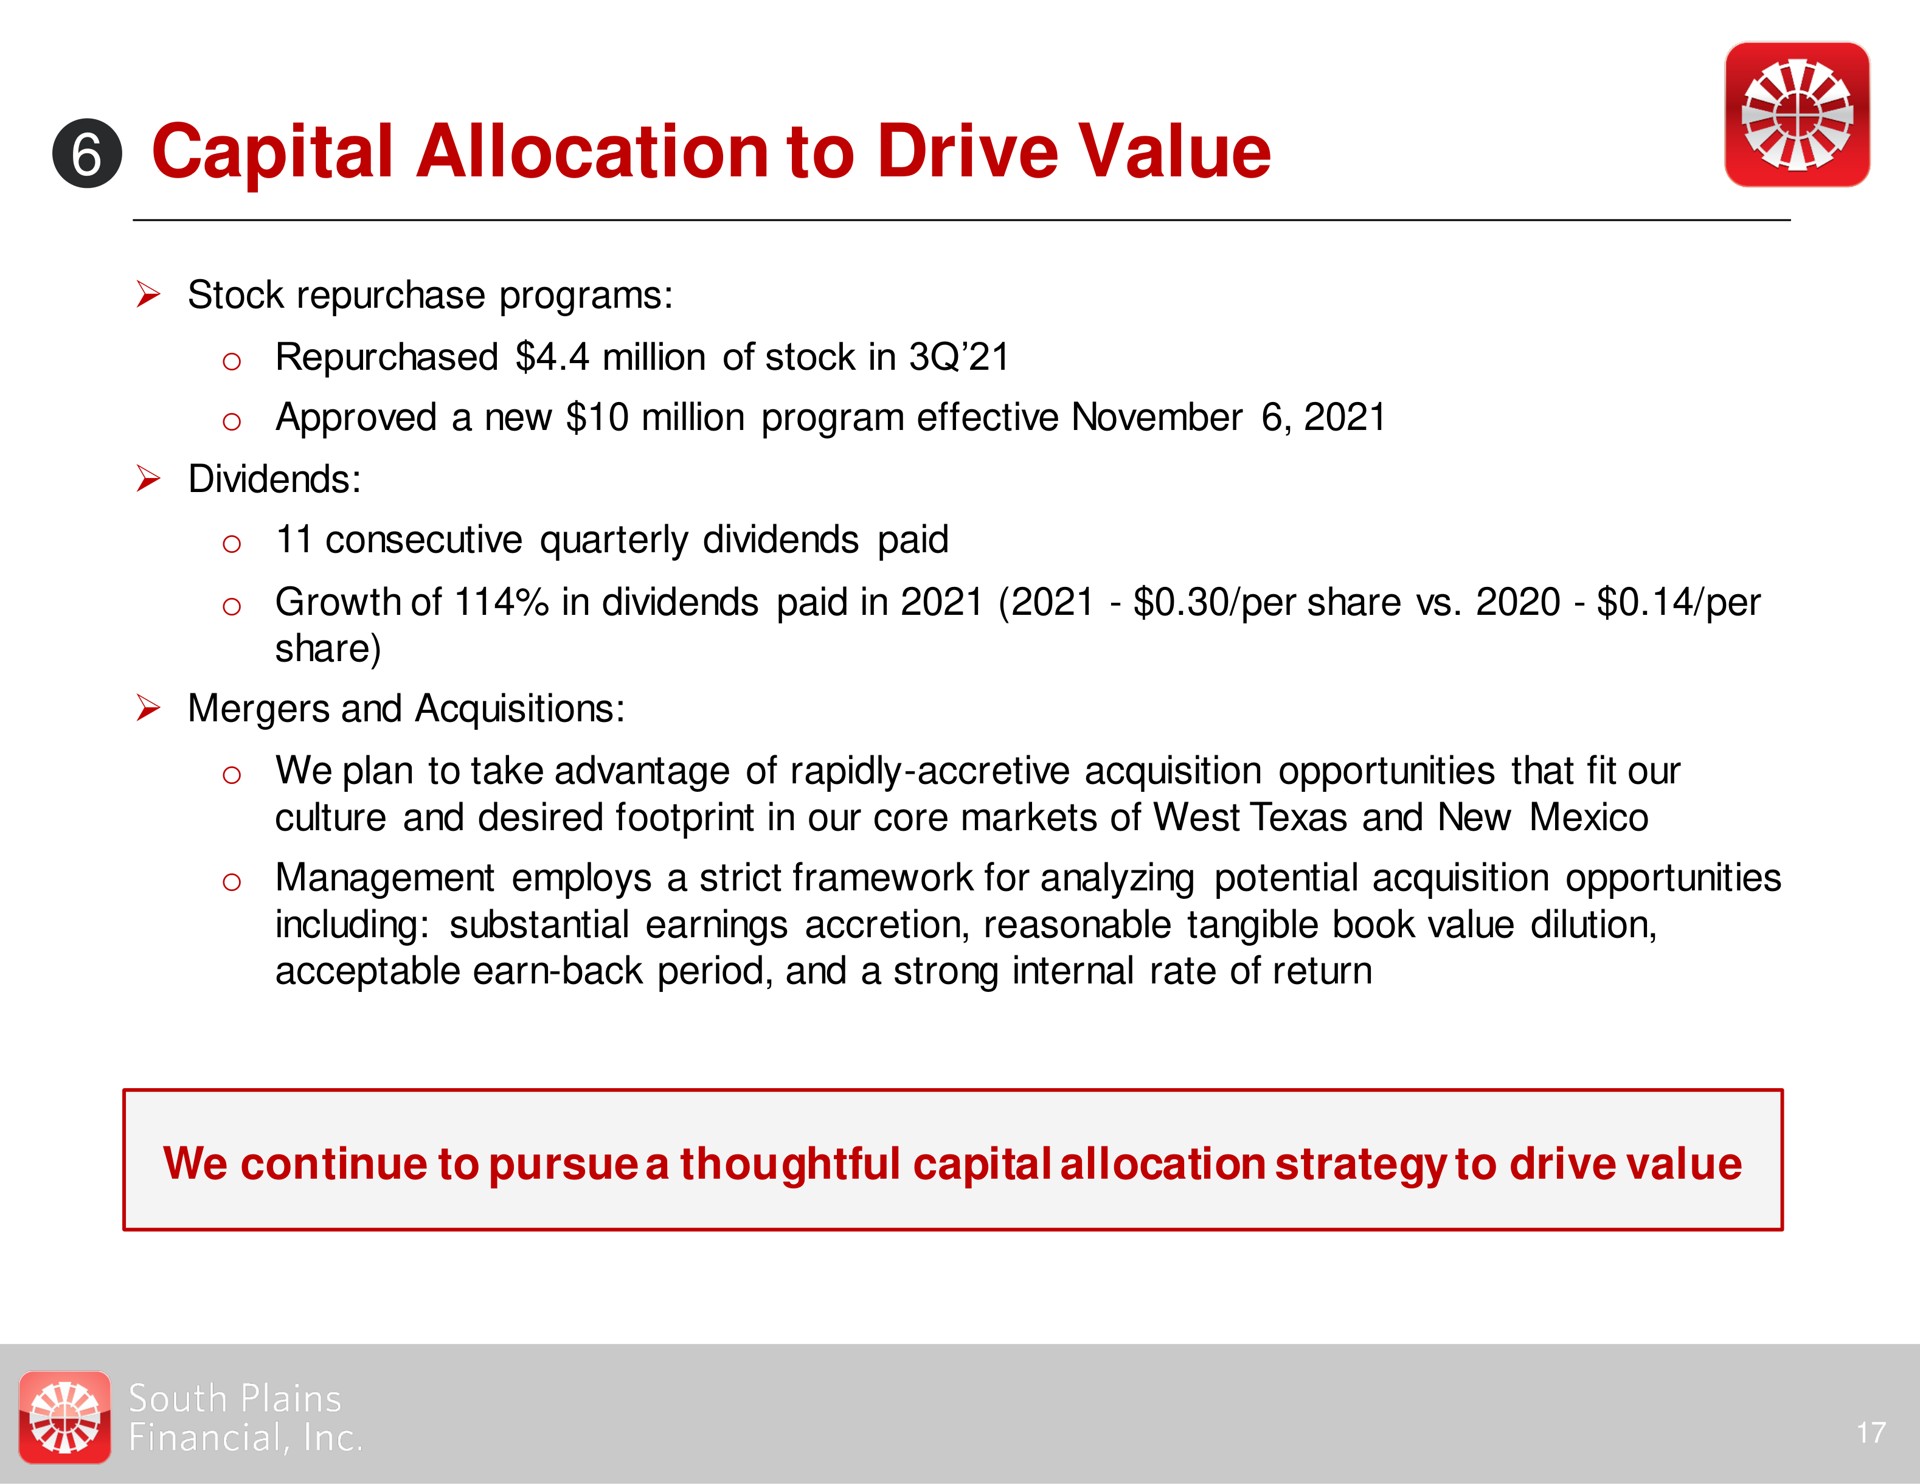 capital allocation to drive value | South Plains Financial